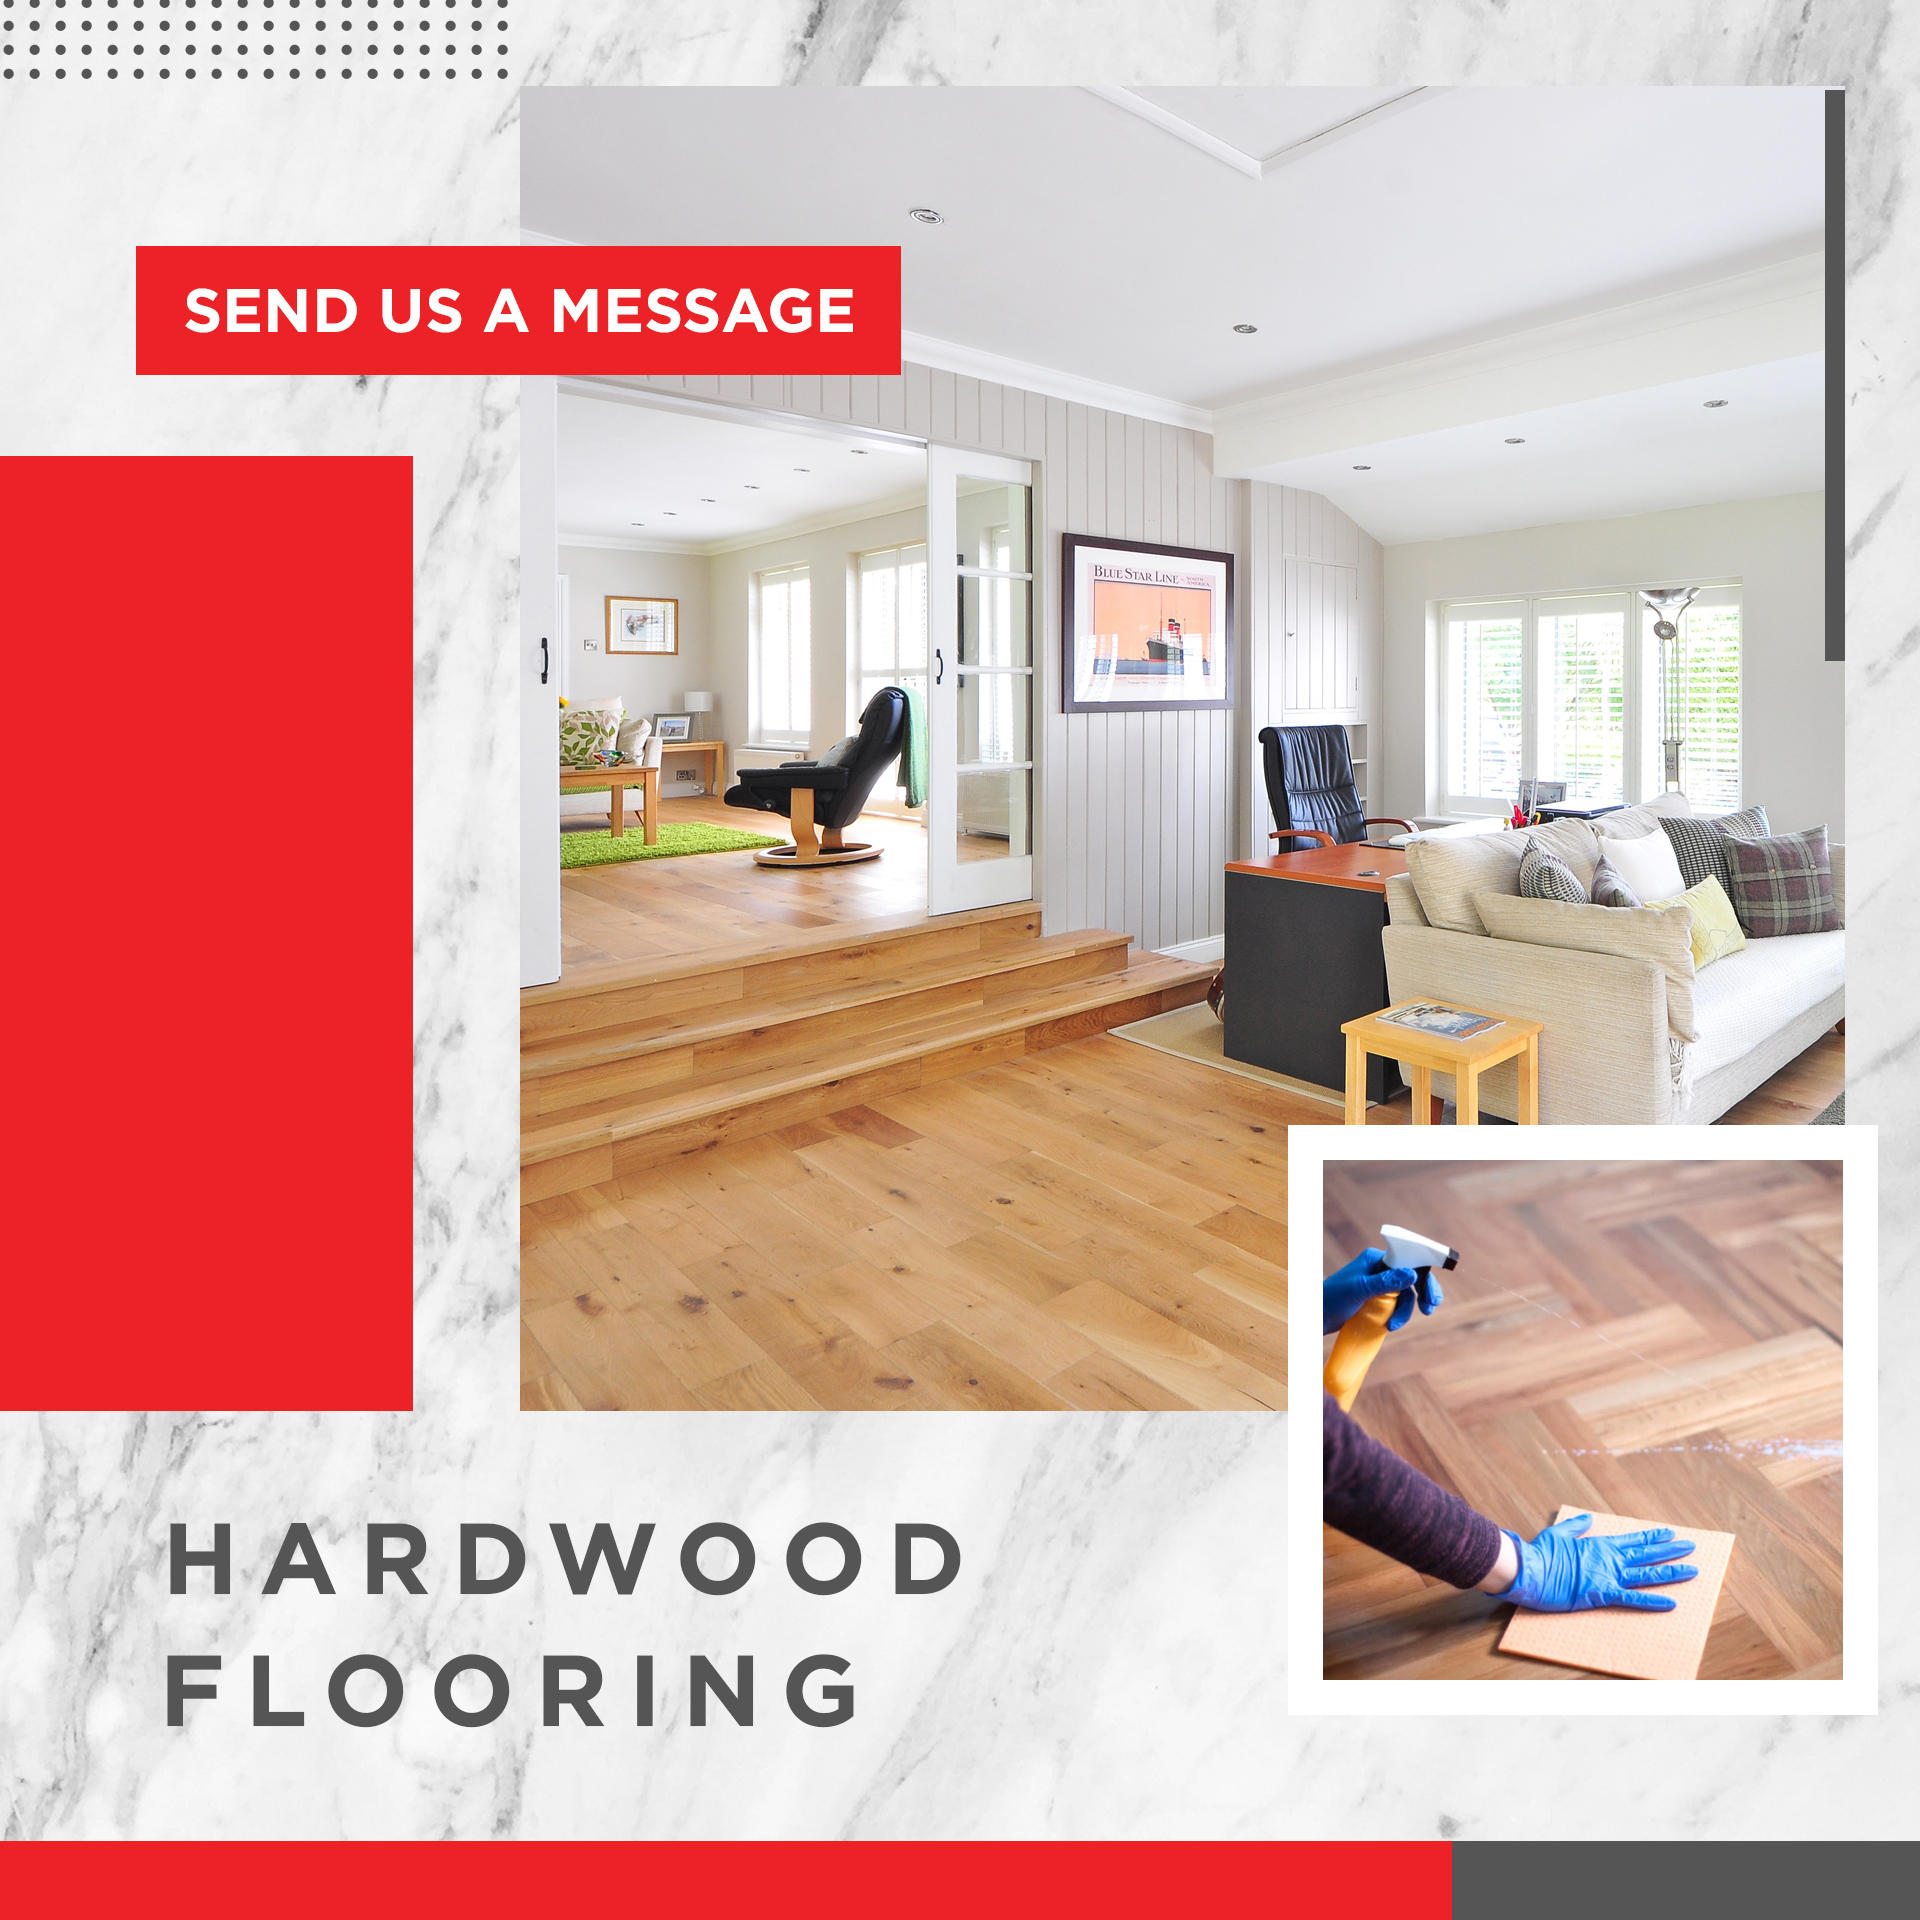 This looks great!! This project we did out in Tempe was a fun one! We installed about 1900 feet of this Hardwood and love how it looks in this house. In this project we removed carpet and replaced it with Hardwood. Call Home Solutionz Today For Your Flooring Project <(623) 289-3880>. Home Solutionz - Tempe is Licensed, Bonded, and Insured. Home Solutionz offers 12 - 24 Months 0% Financing Through Wells Fargo. Home Solutionz Tempe - 3125 S 52nd St, Suite 107 Tempe, AZ 85282 United States  Hardwood  FloorInstallation  Flooring (Disclaimer: flooring on photos aren't actual products of Home Solutionz but these are what we can offer)